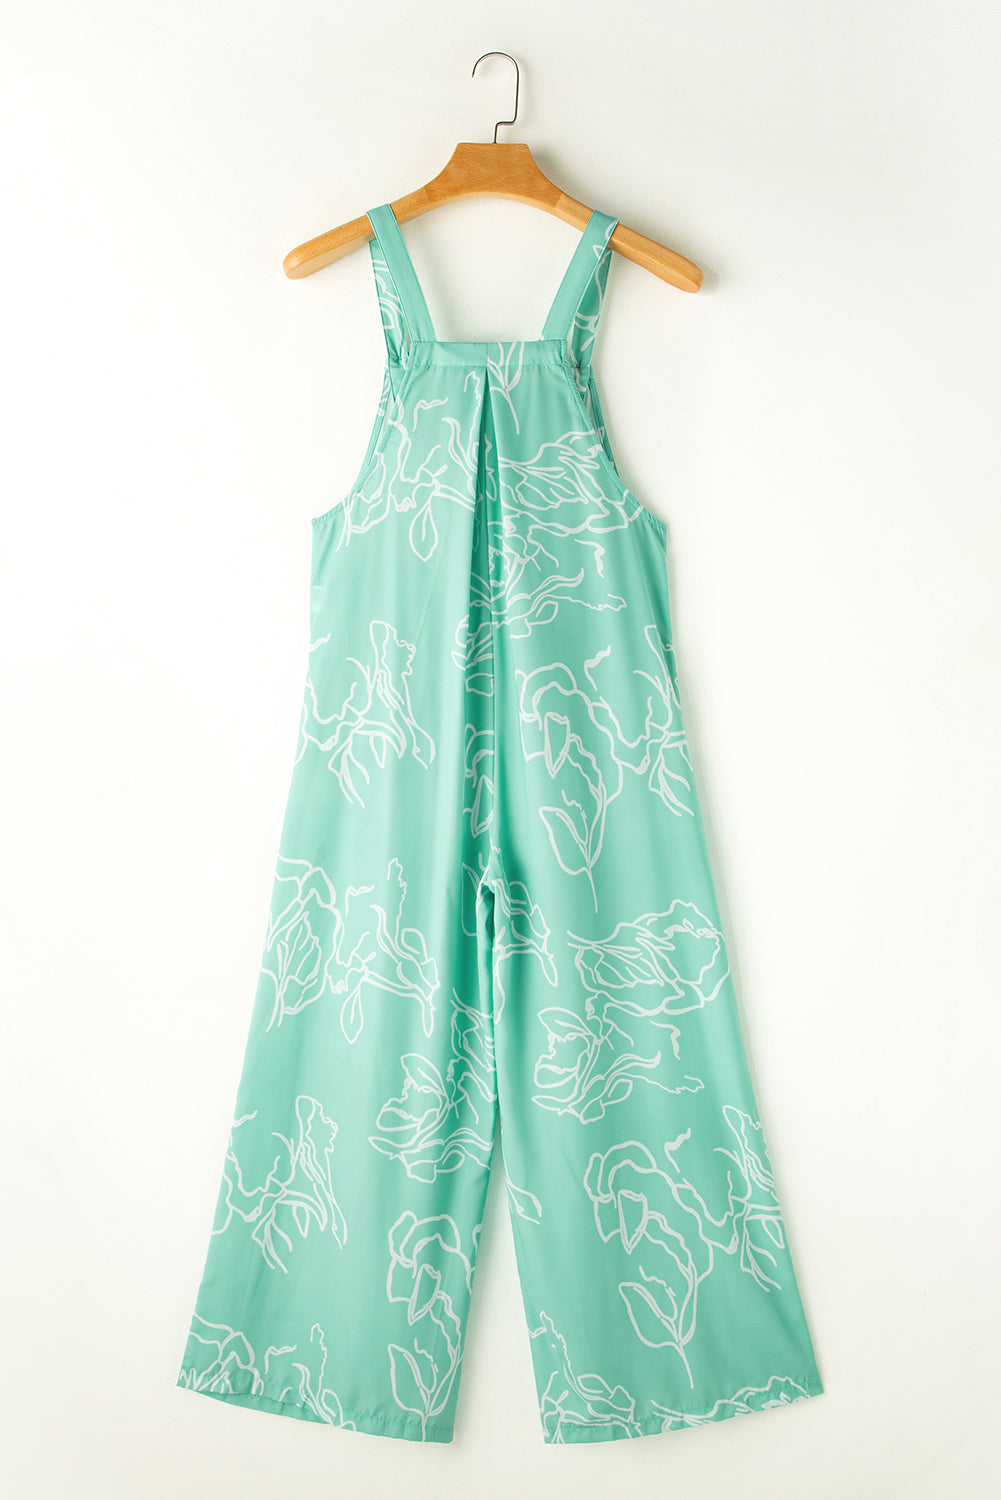 Aqua Green Large Floral Printed Wide Leg Button Overall Jumpsuit